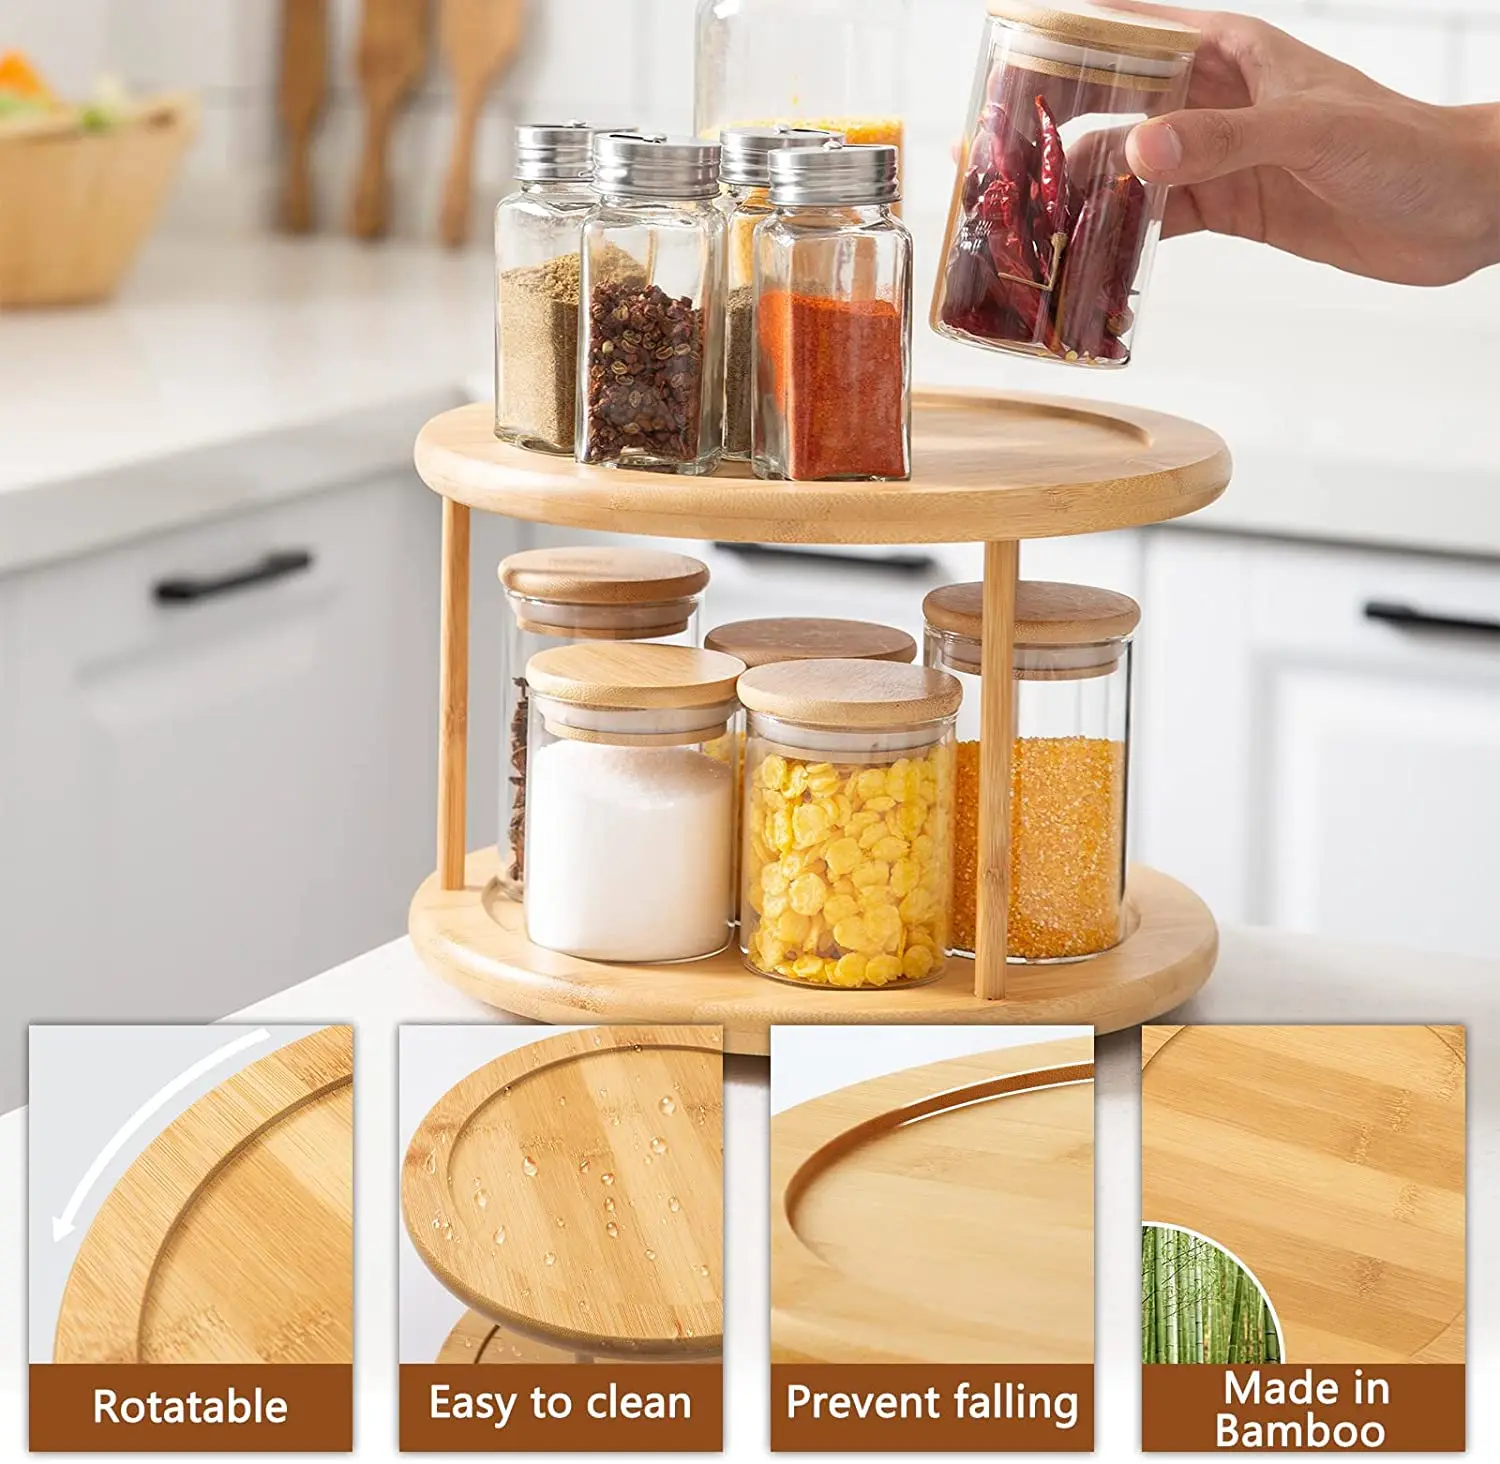 Balanced Smooth Spin Thicken Round Wood Tray Rotating Spice Rack for Kitchen Pantry Countertop Table 12 Premium Solid Bamboo Lazy Susan Wood Turntable Tray Cabinet Organizer 